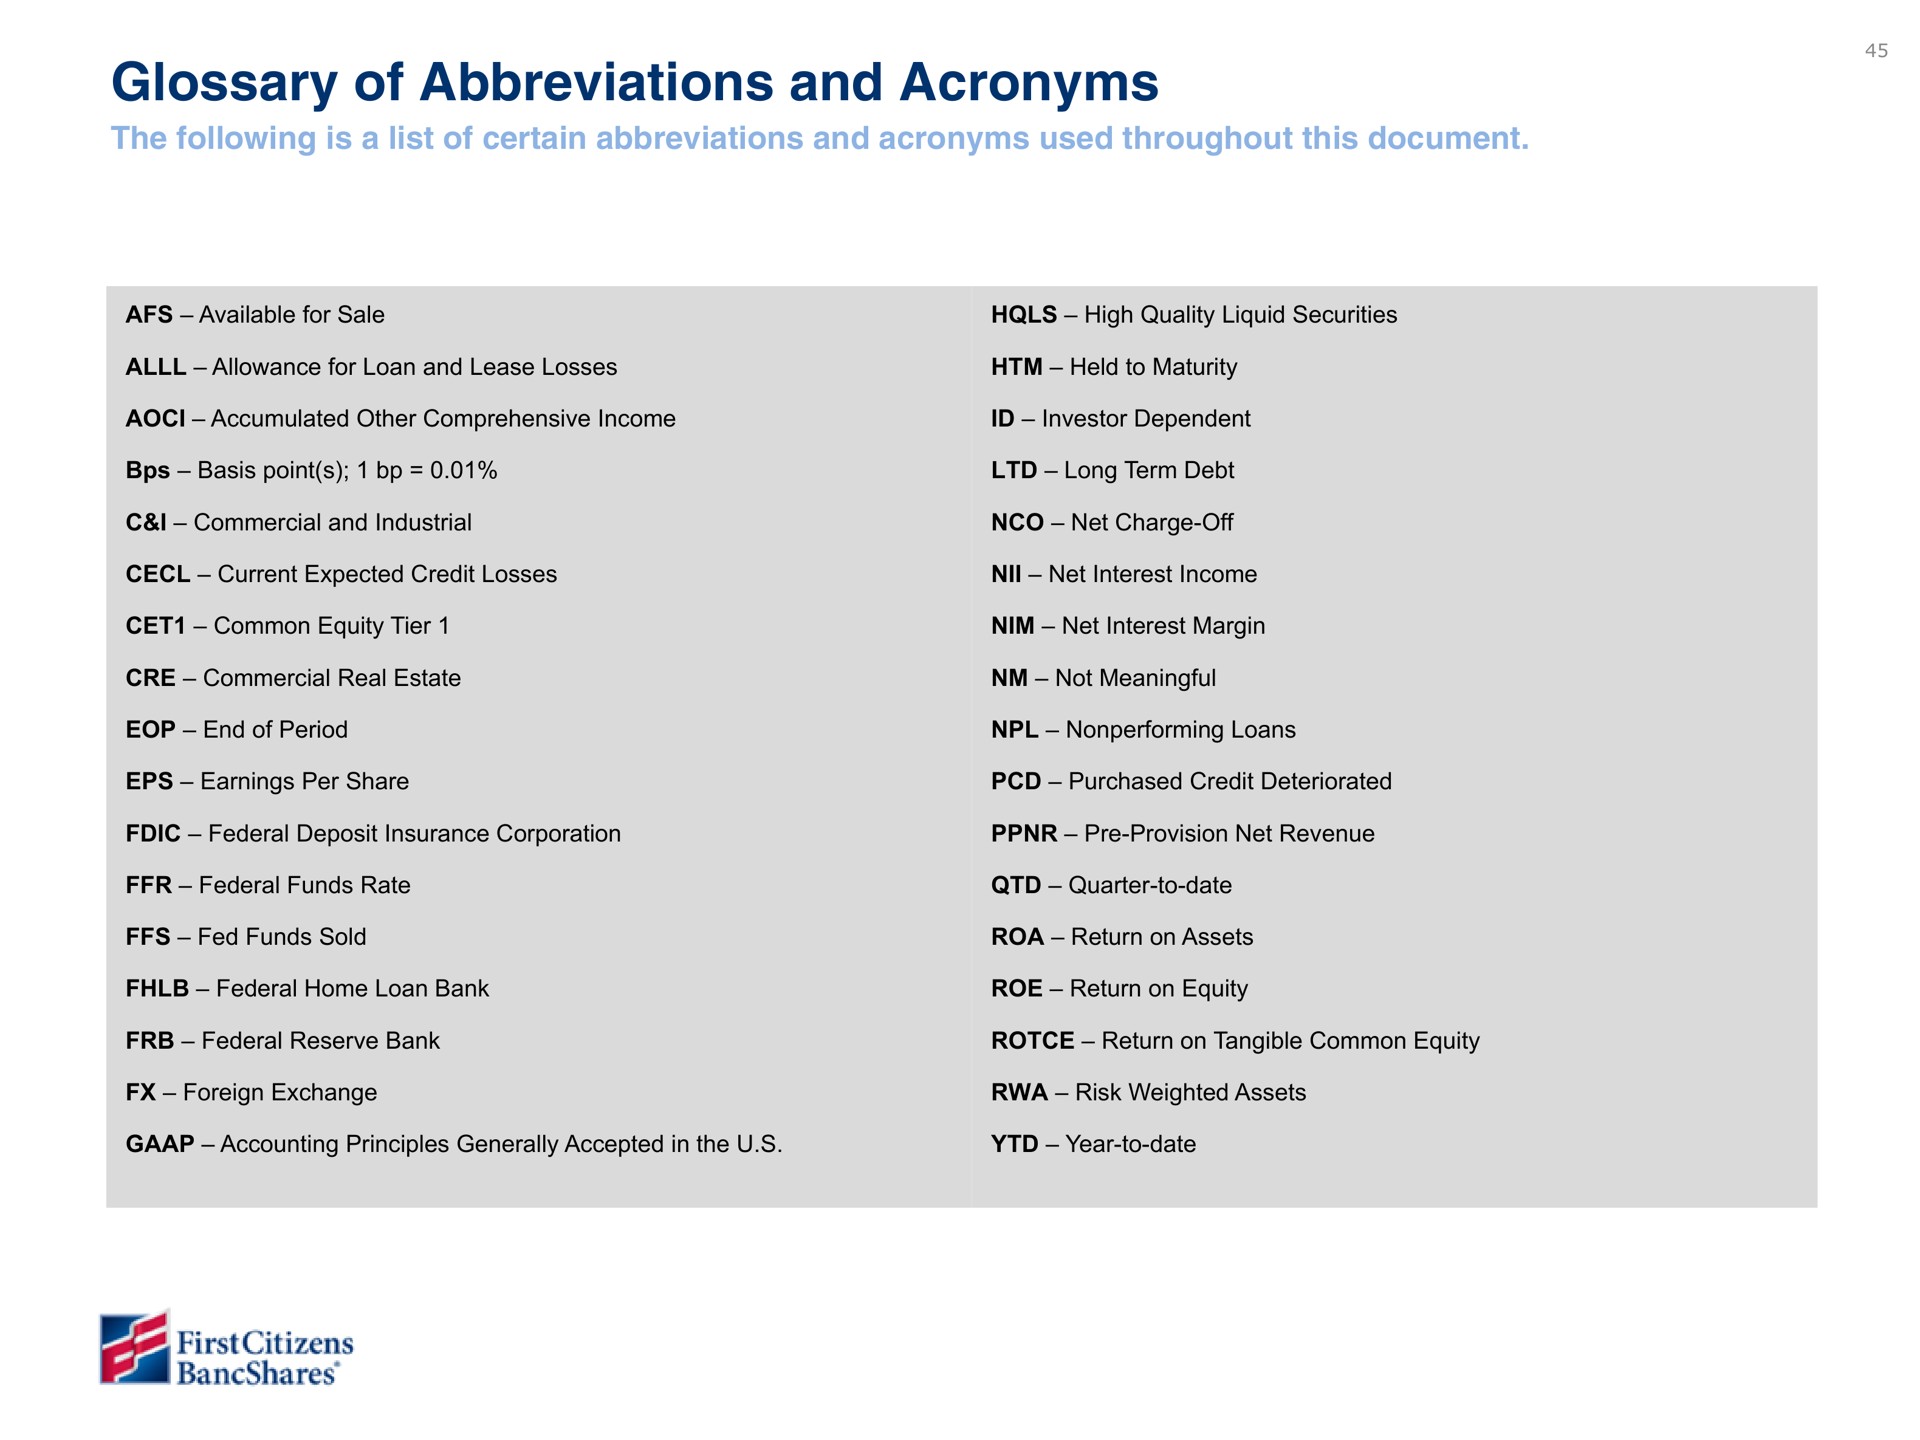 glossary of abbreviations and acronyms | First Citizens BancShares